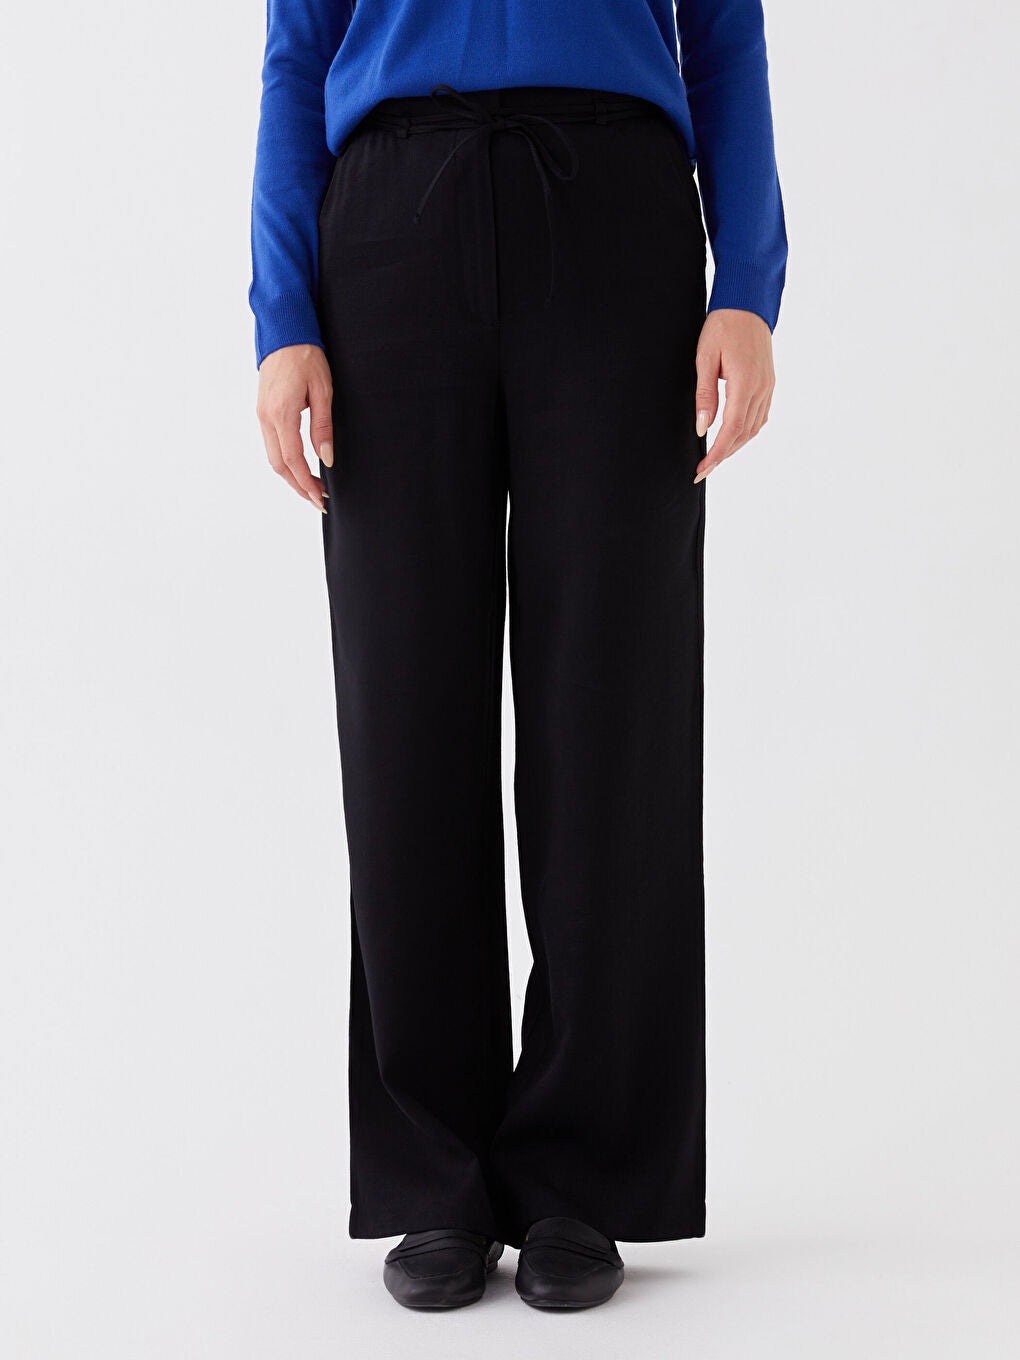 Comfortable Fit Women Trousers With Elastic Waist